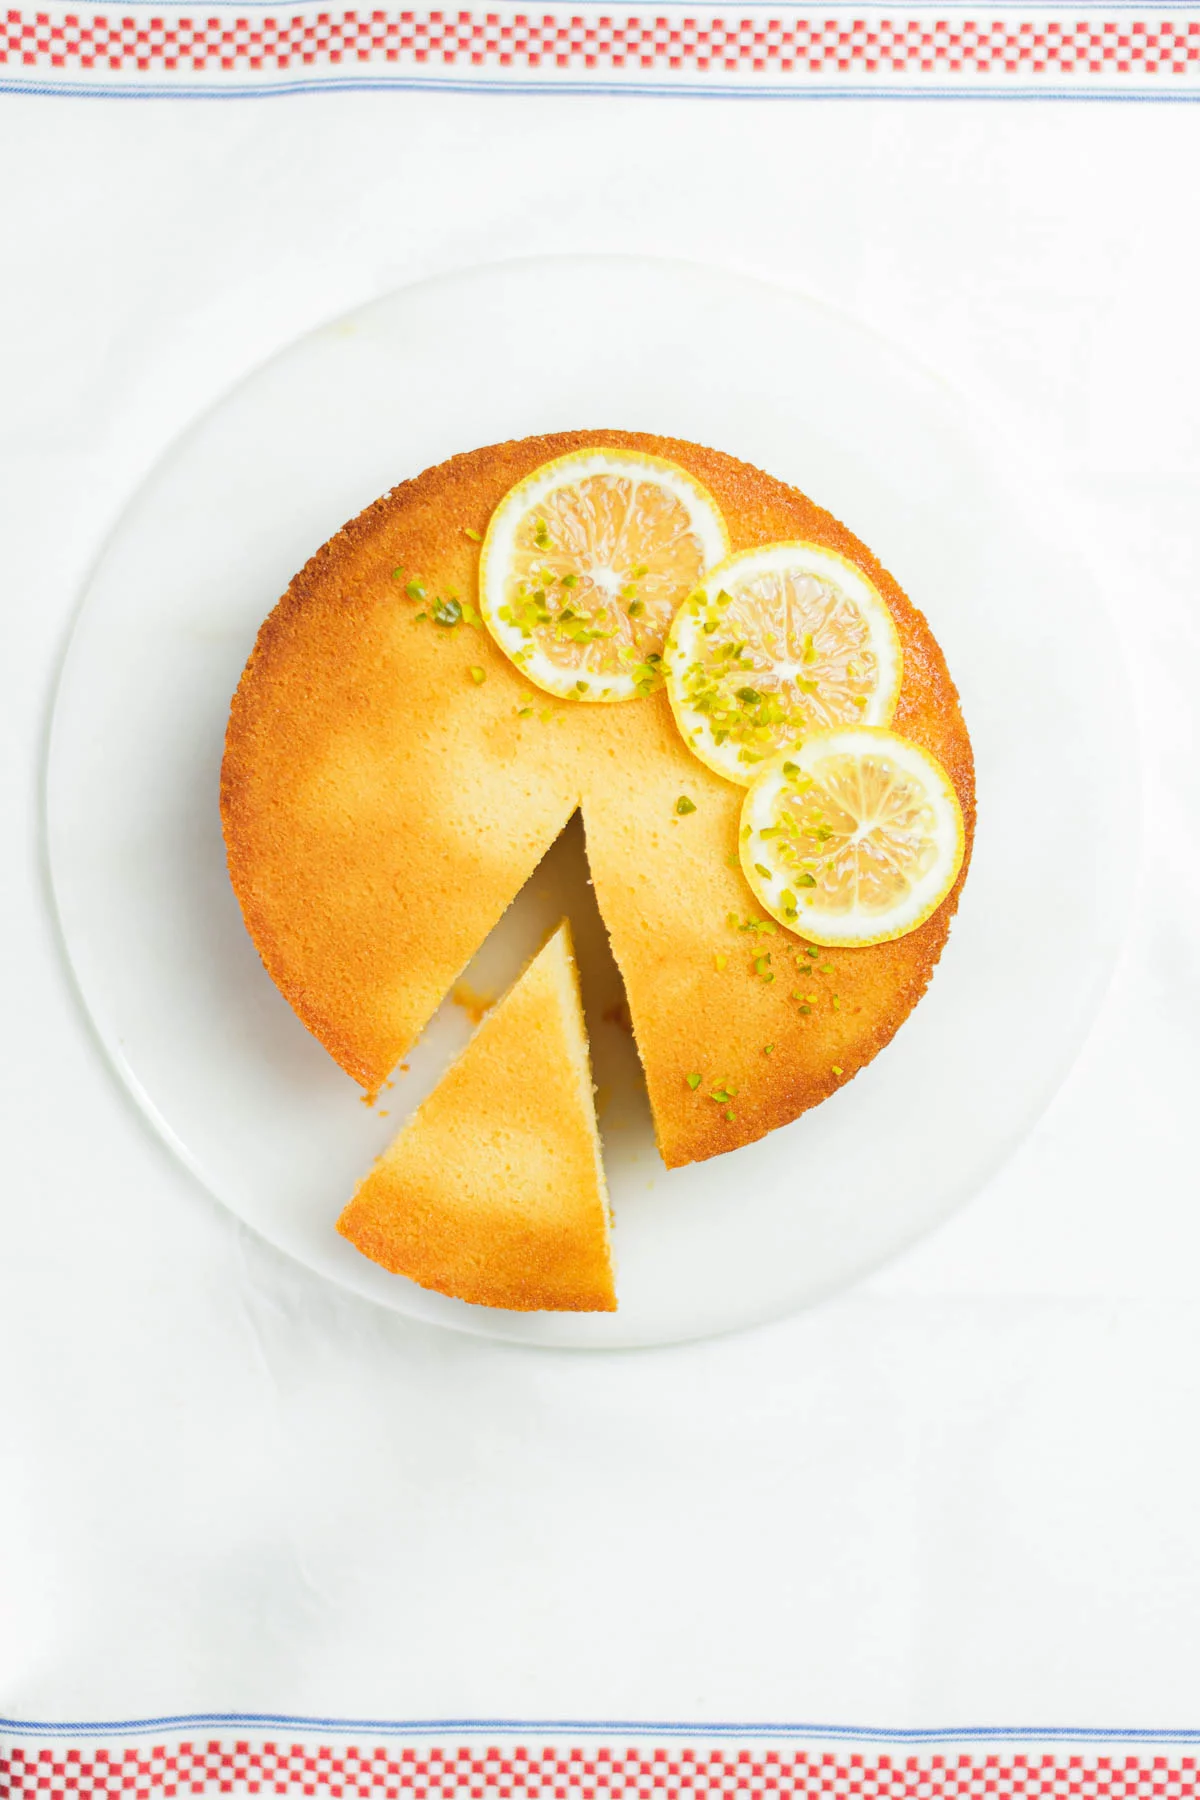 Super moist just by mixing How to make a refreshing lemon cake with lots of lemon